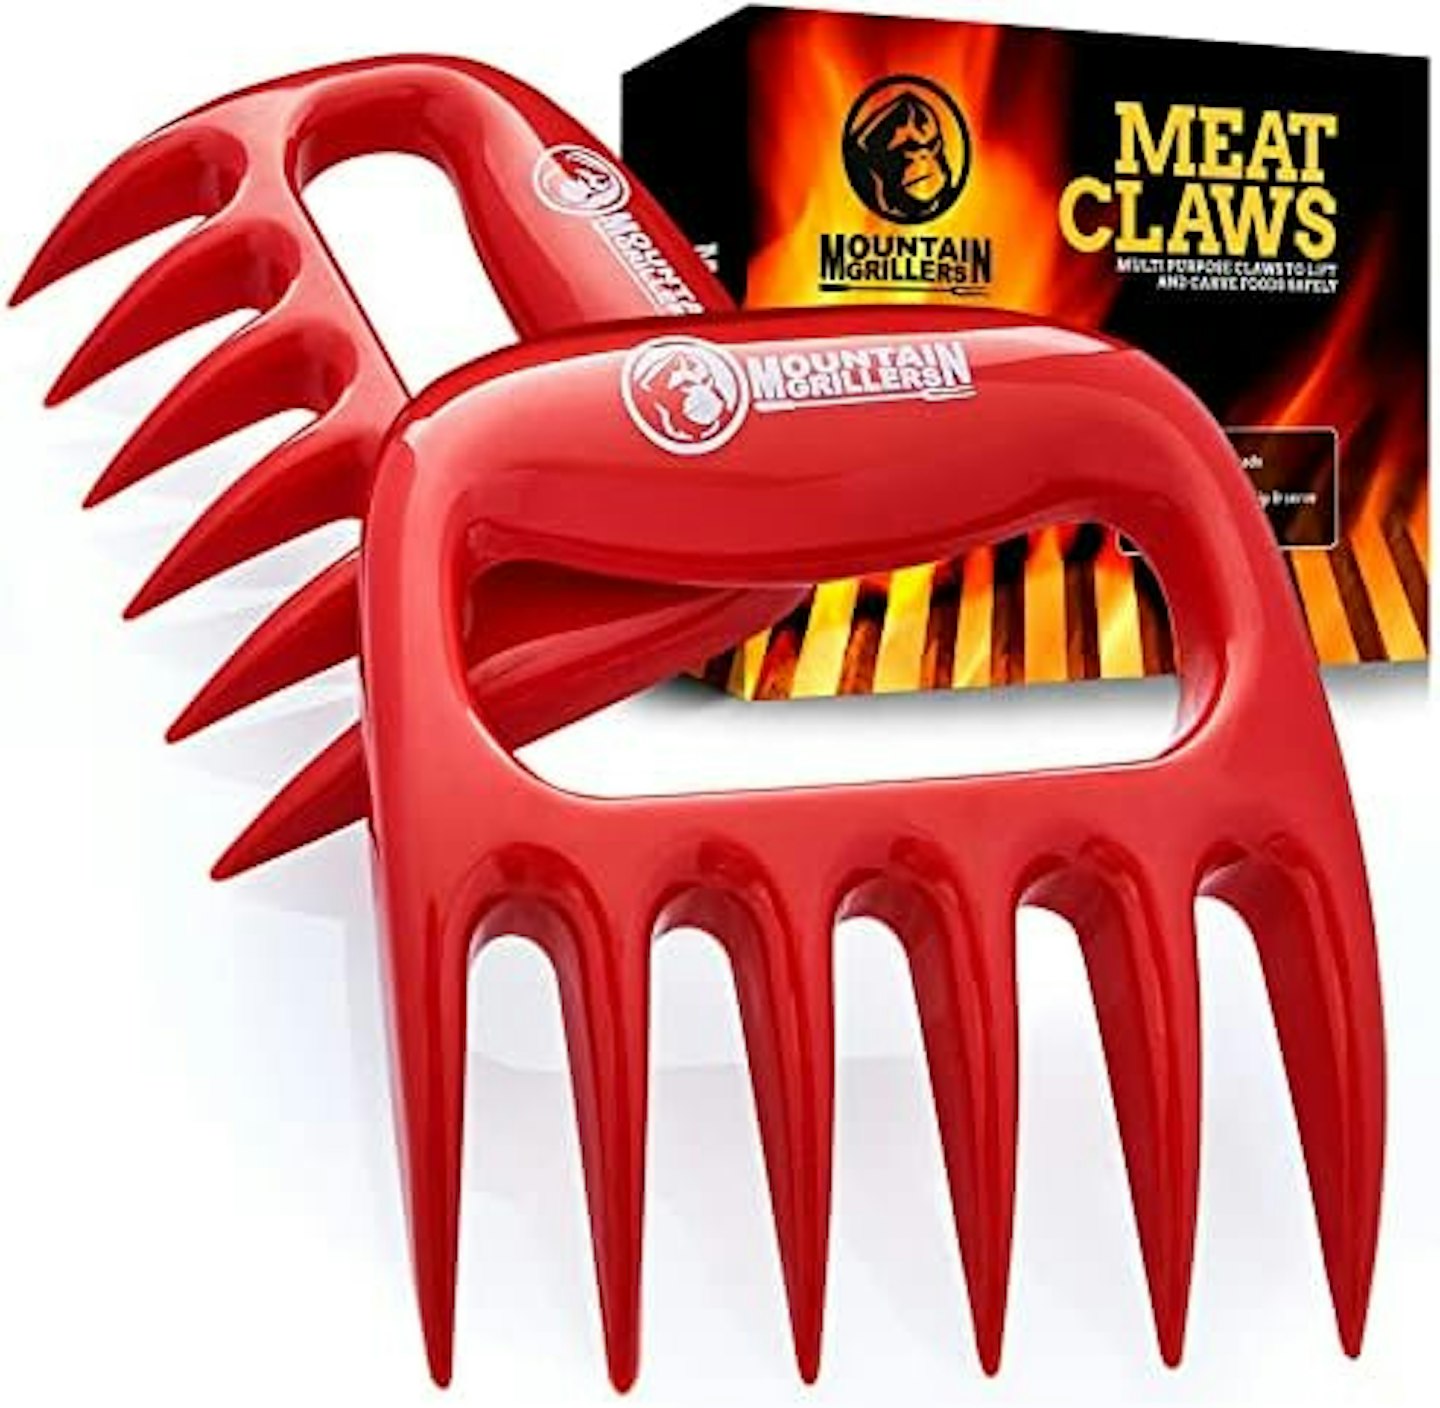 Mountain Grillers claws 